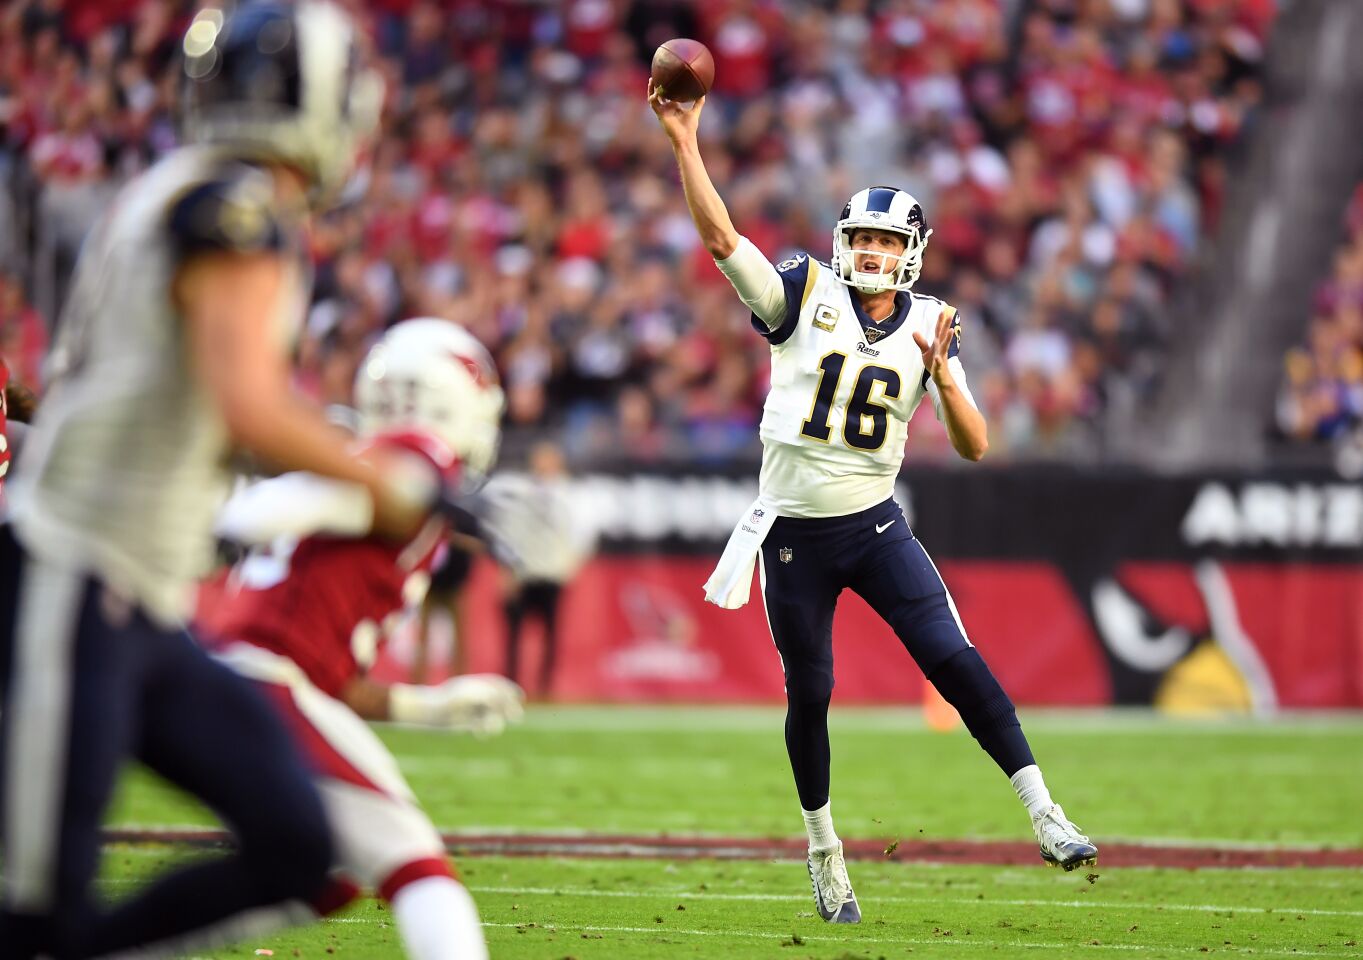 Rams quarterback Jared Goff completes a pass to receiver Cooper Kupp.